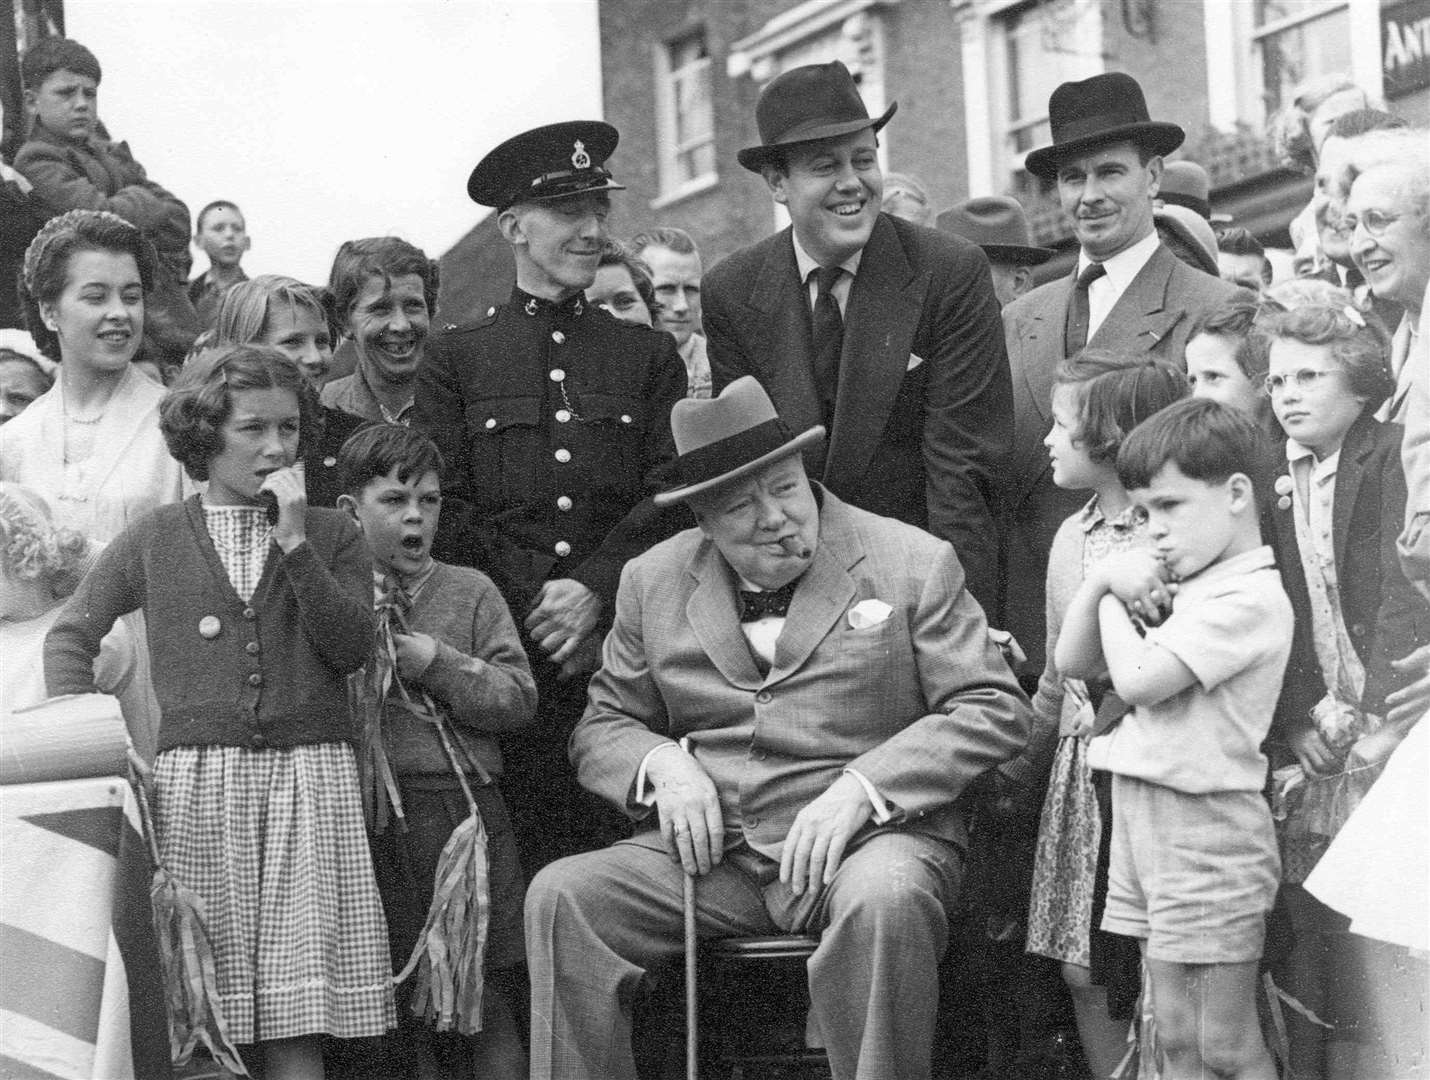 Winston Churchill pictured at the annual carnival procession at Westerham in June 1954. His son-in-law Christopher Soames is standing behind his chair